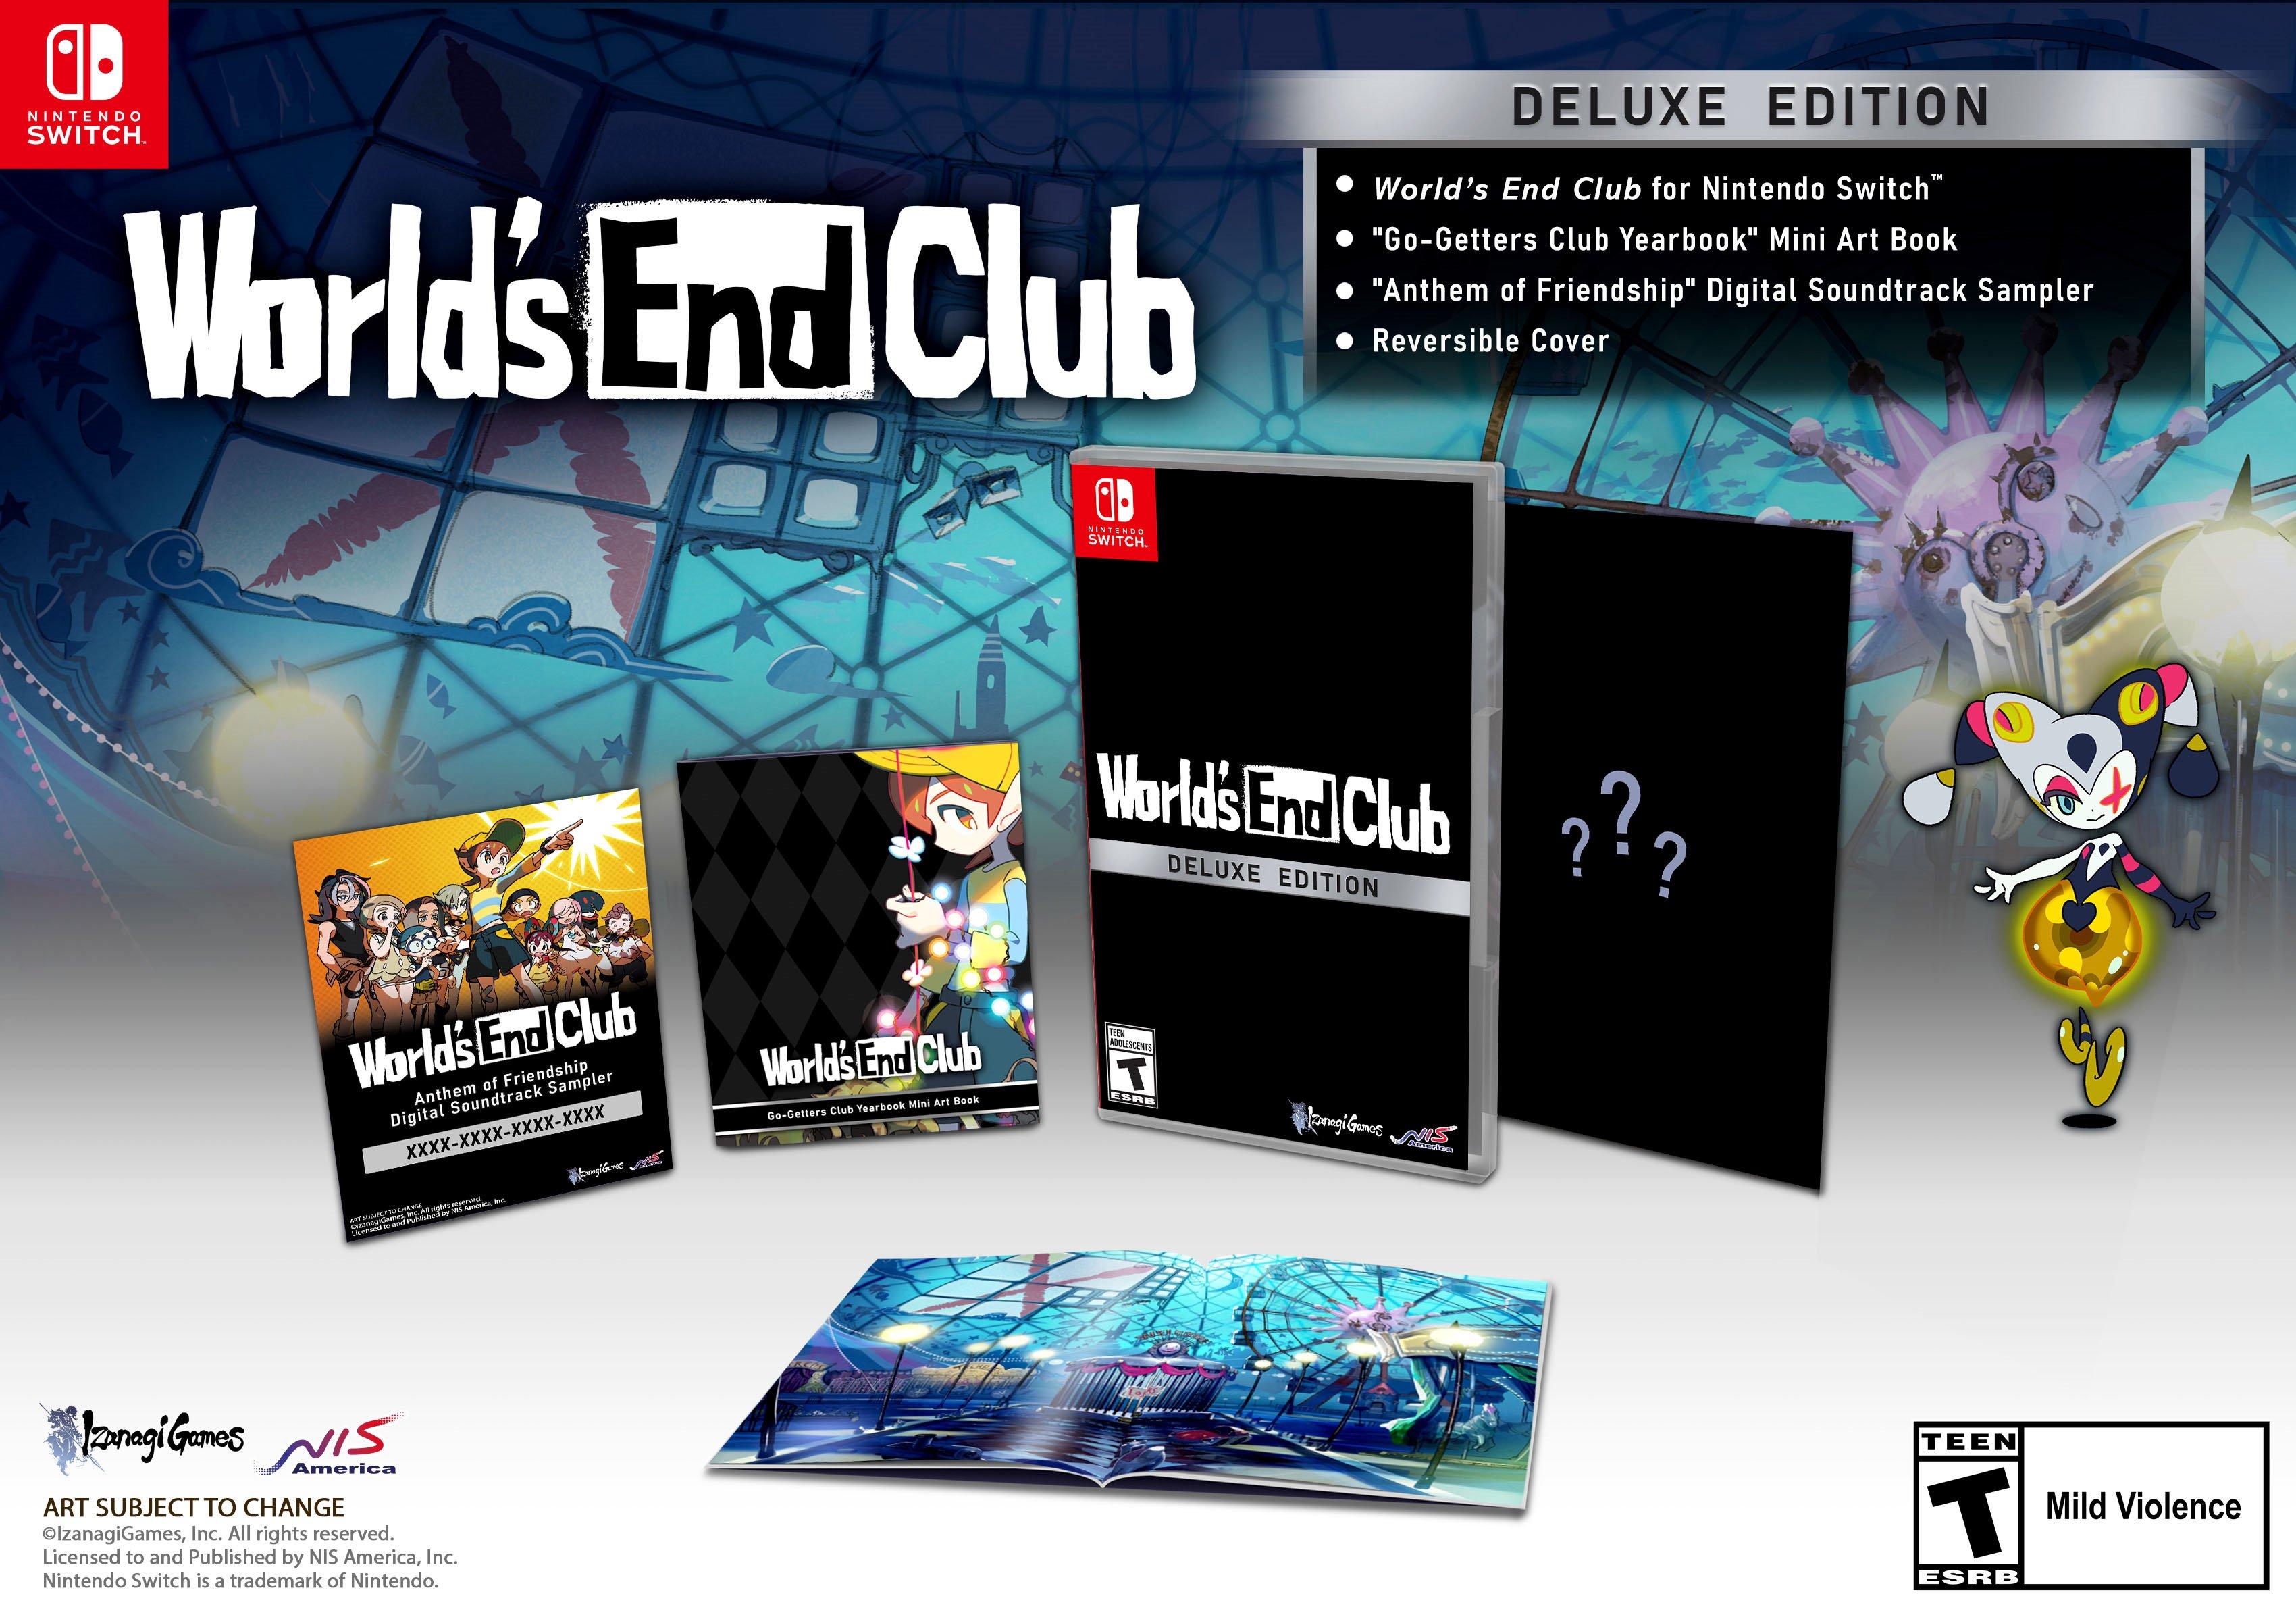 World's End Club Deluxe Edition - Nintendo Switch Deluxe